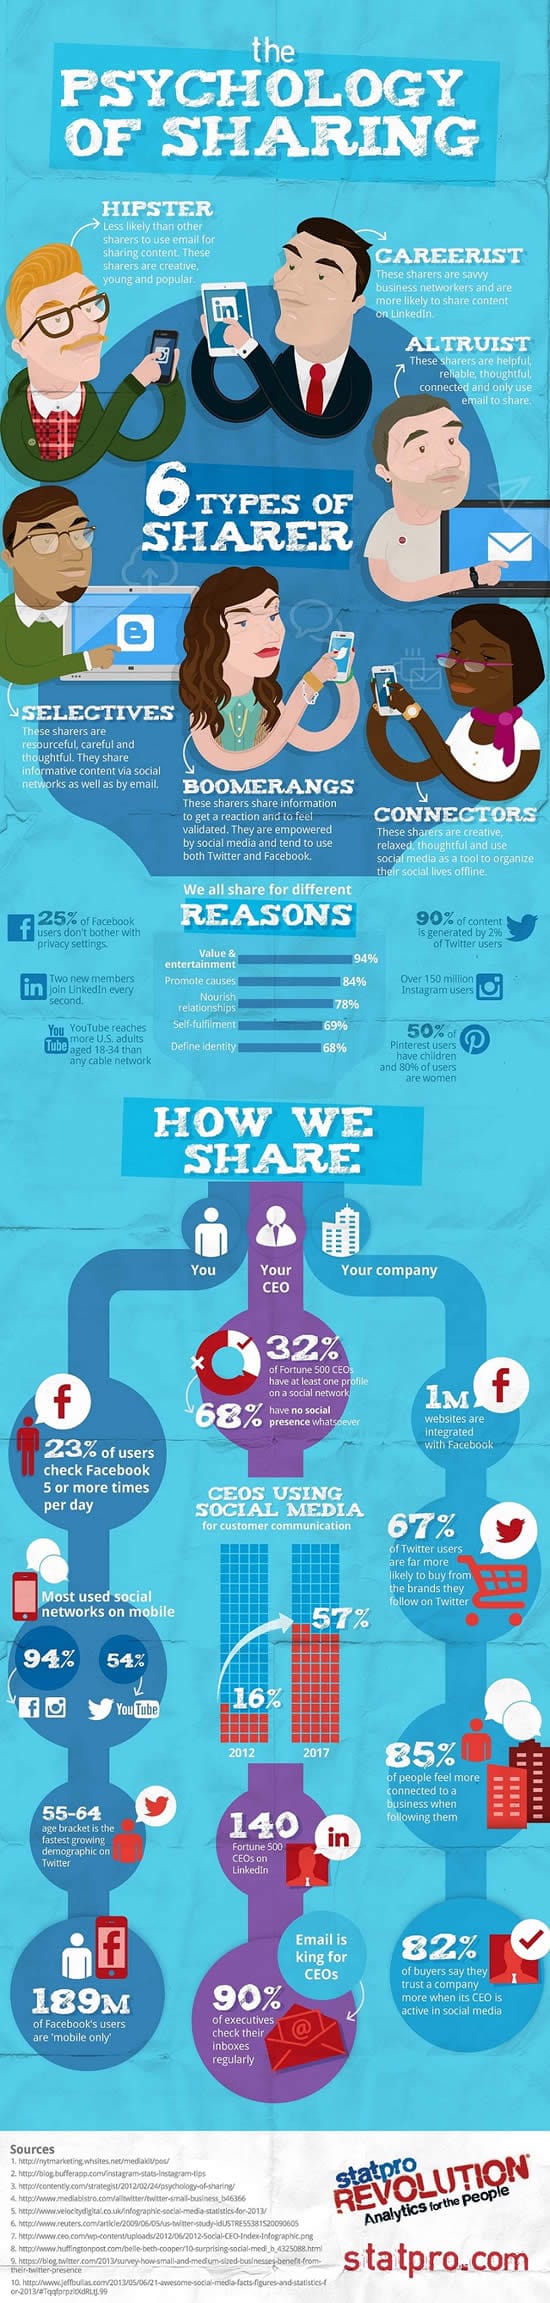 The psychology of sharing – infographic by StatPro via MarketingProfs – click to view larger version